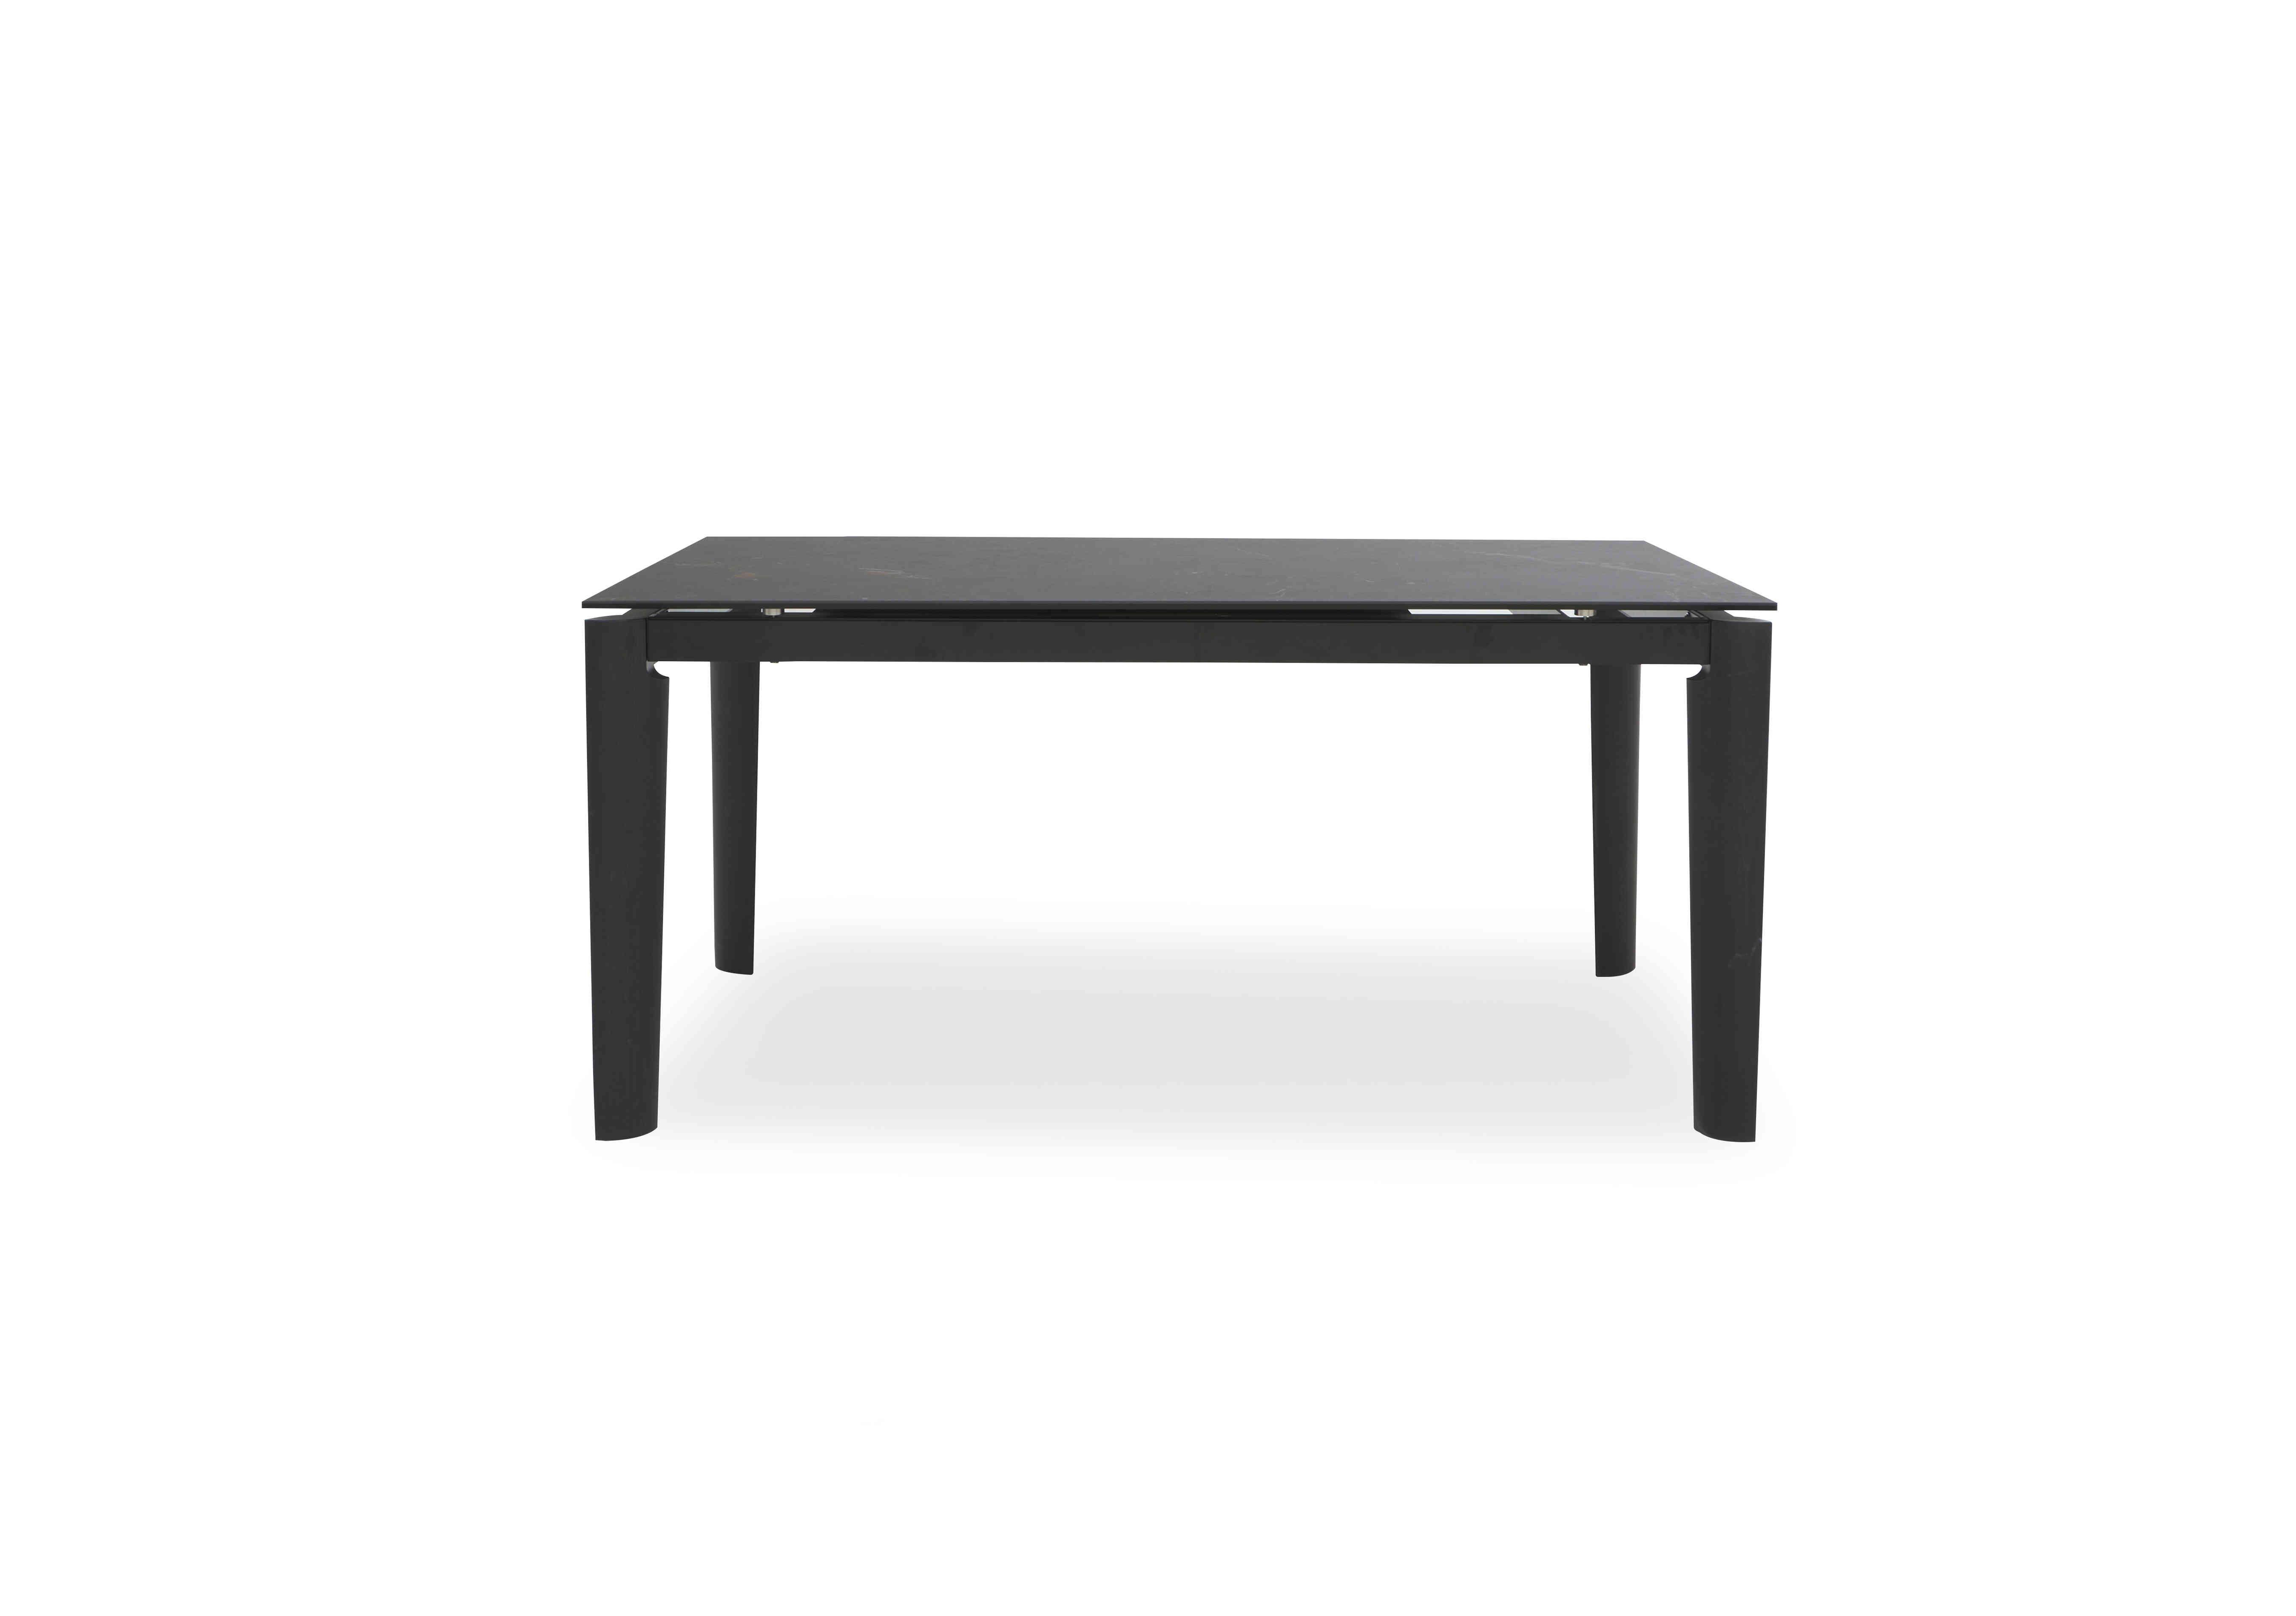 Lord Extending Dining Table in Calacatta Ceramic /Graphite on Furniture Village